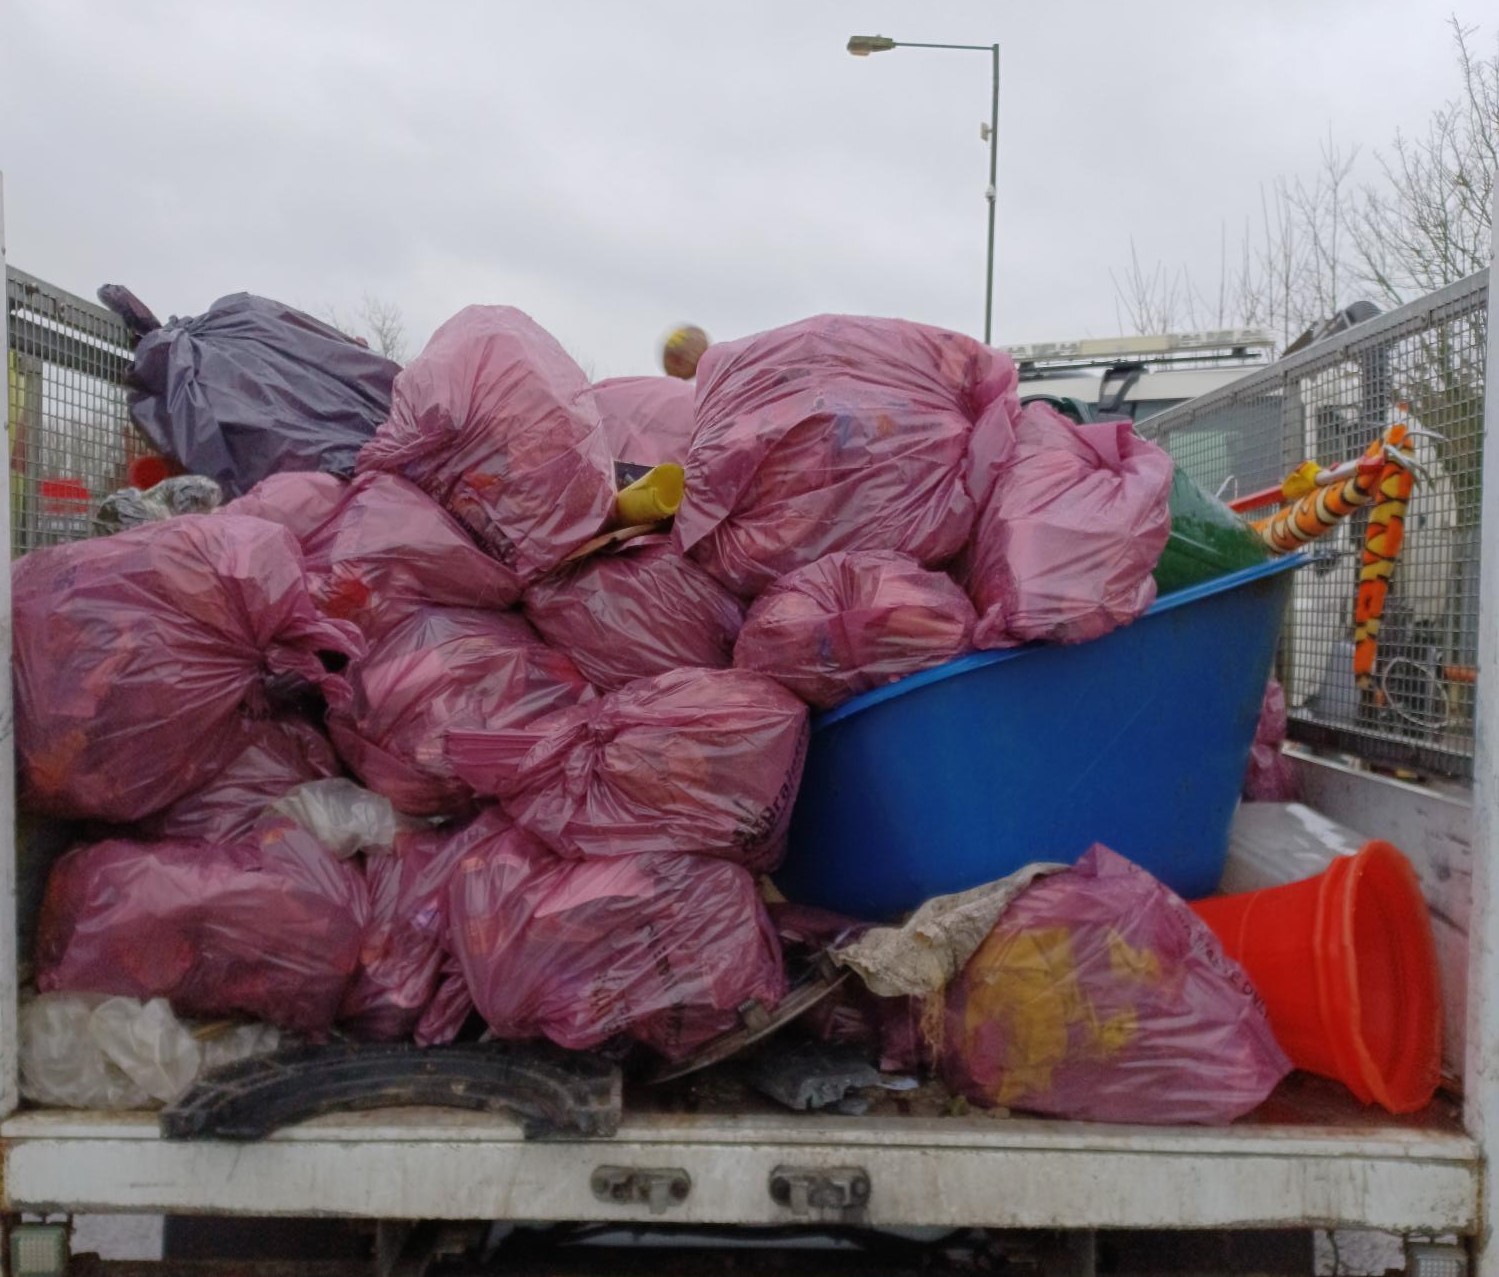 A selection of various items and general litter cleared from the A120